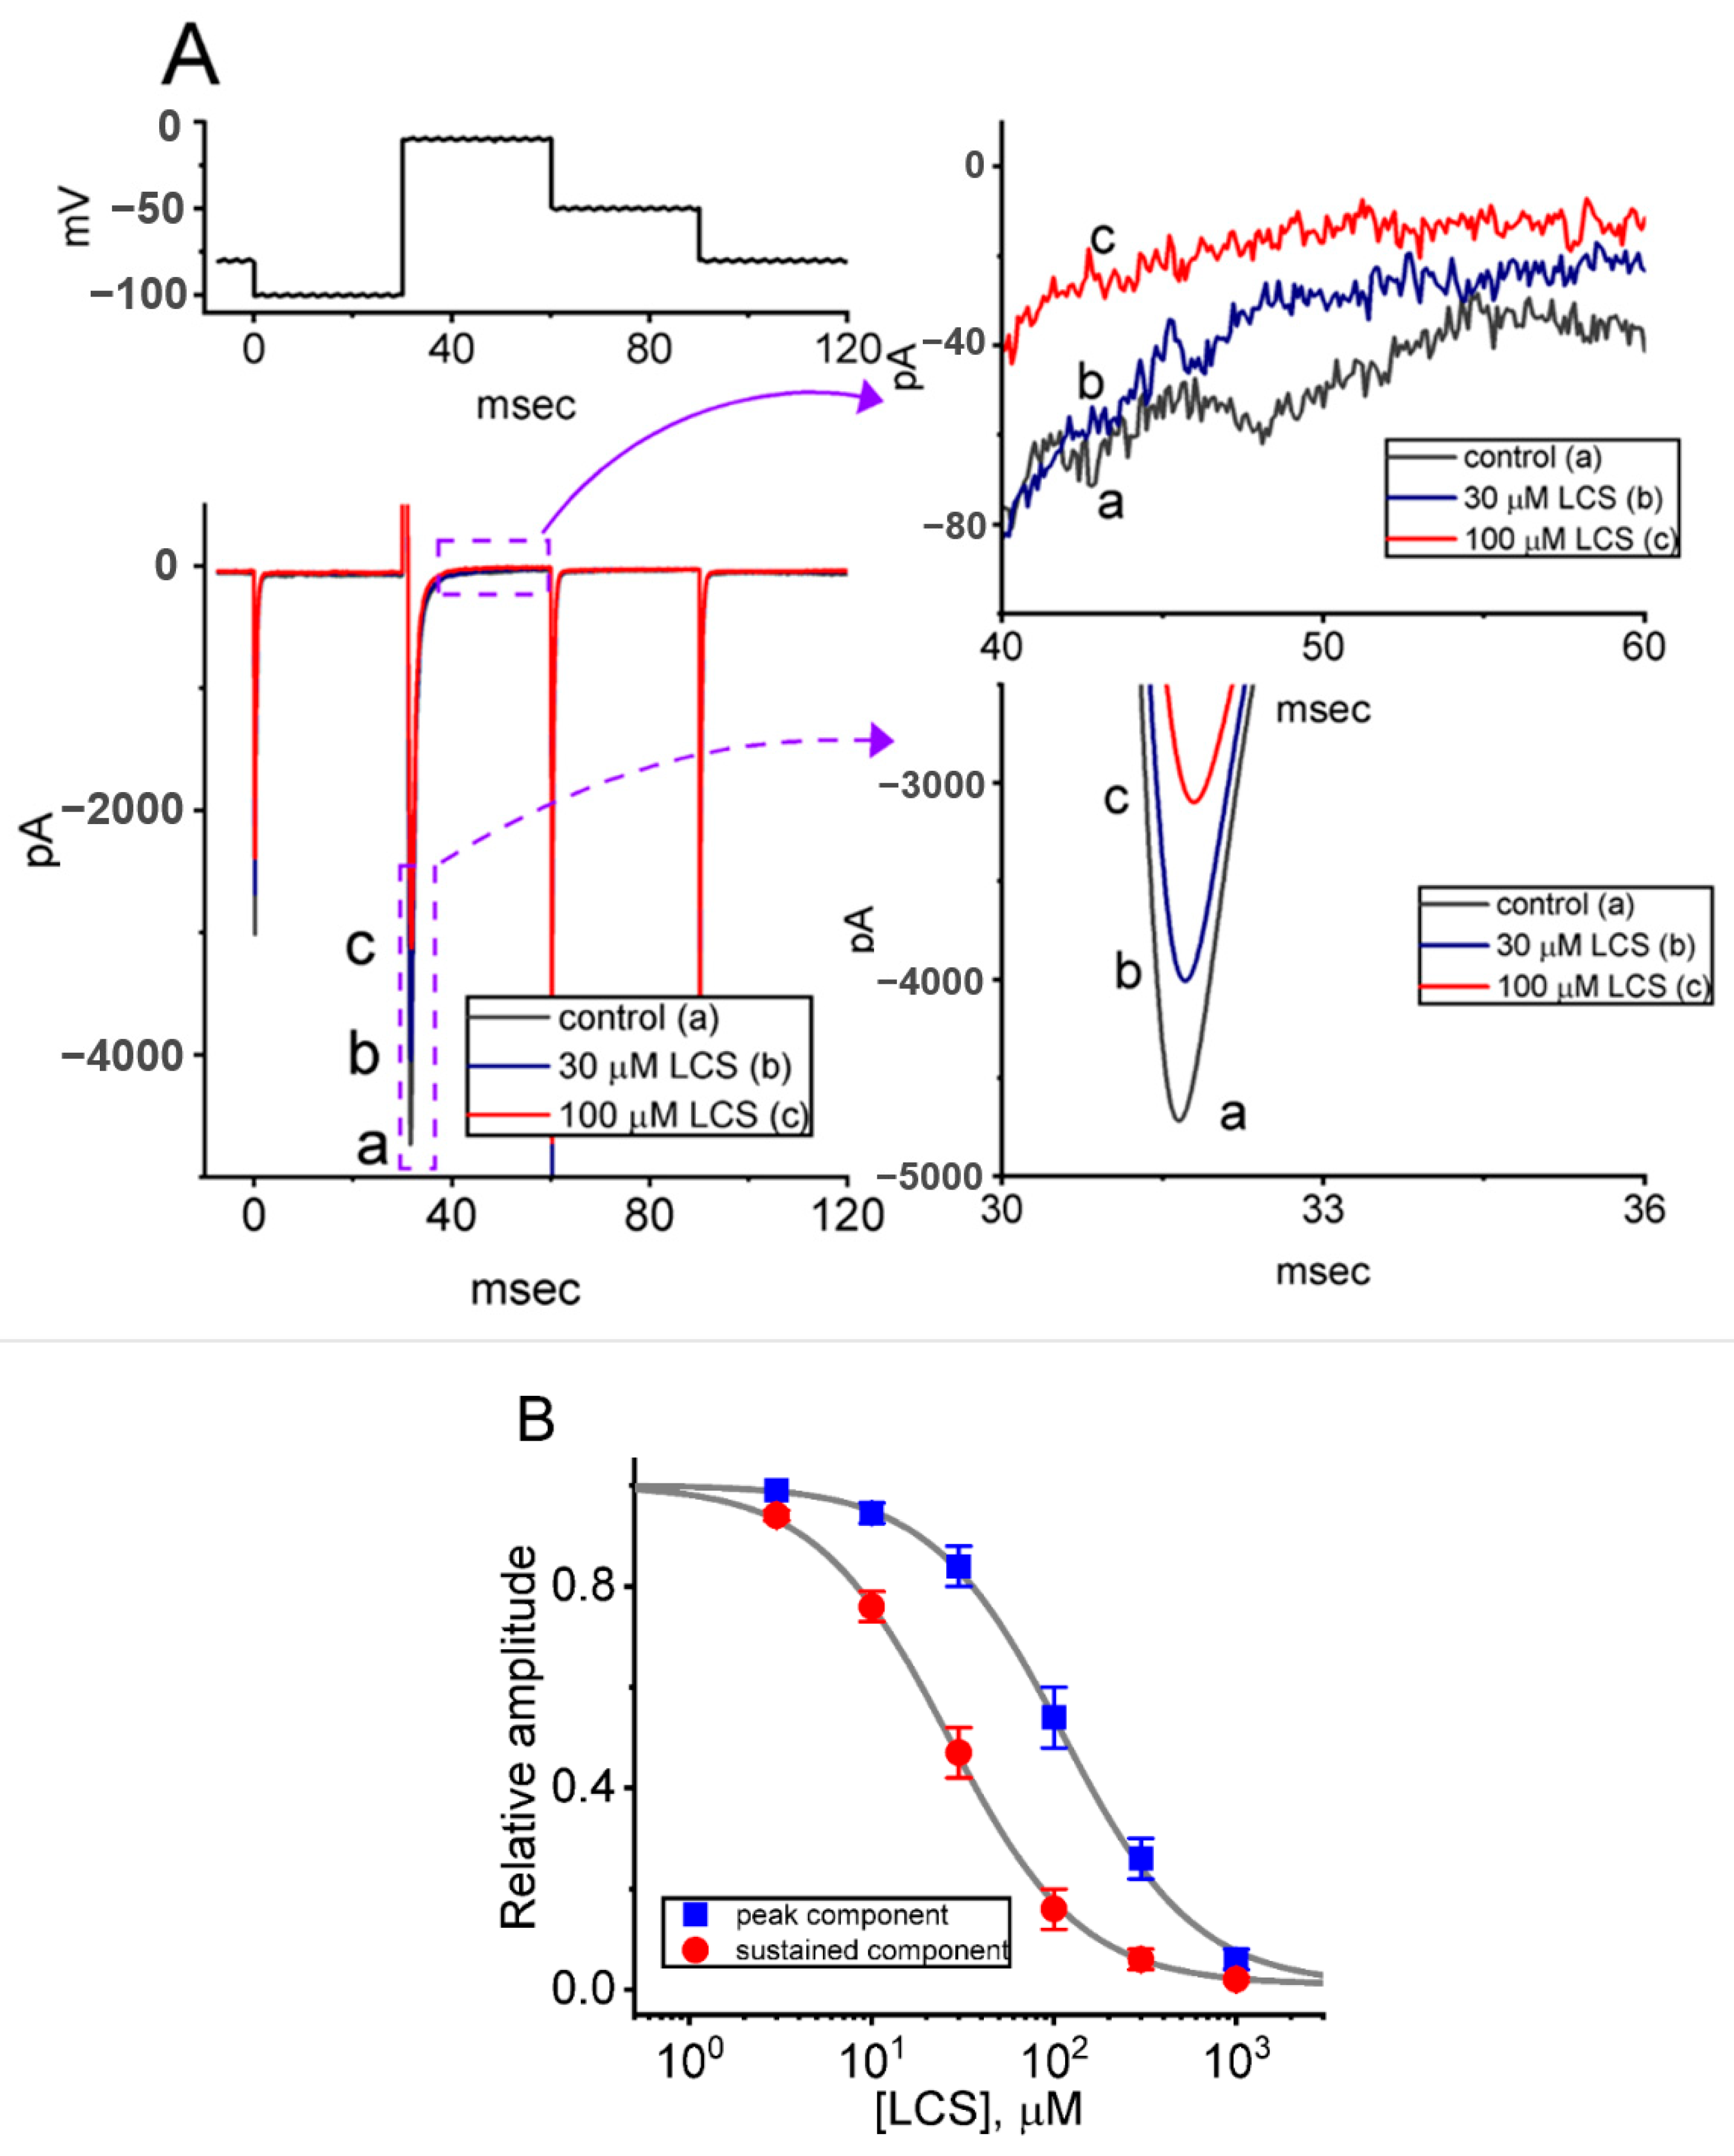 IJMS | Free Full-Text | Effective Modulation by Lacosamide on Cumulative  Inhibition of INa during High-Frequency Stimulation and Recovery of INa  Block during Conditioning Pulse Train | HTML